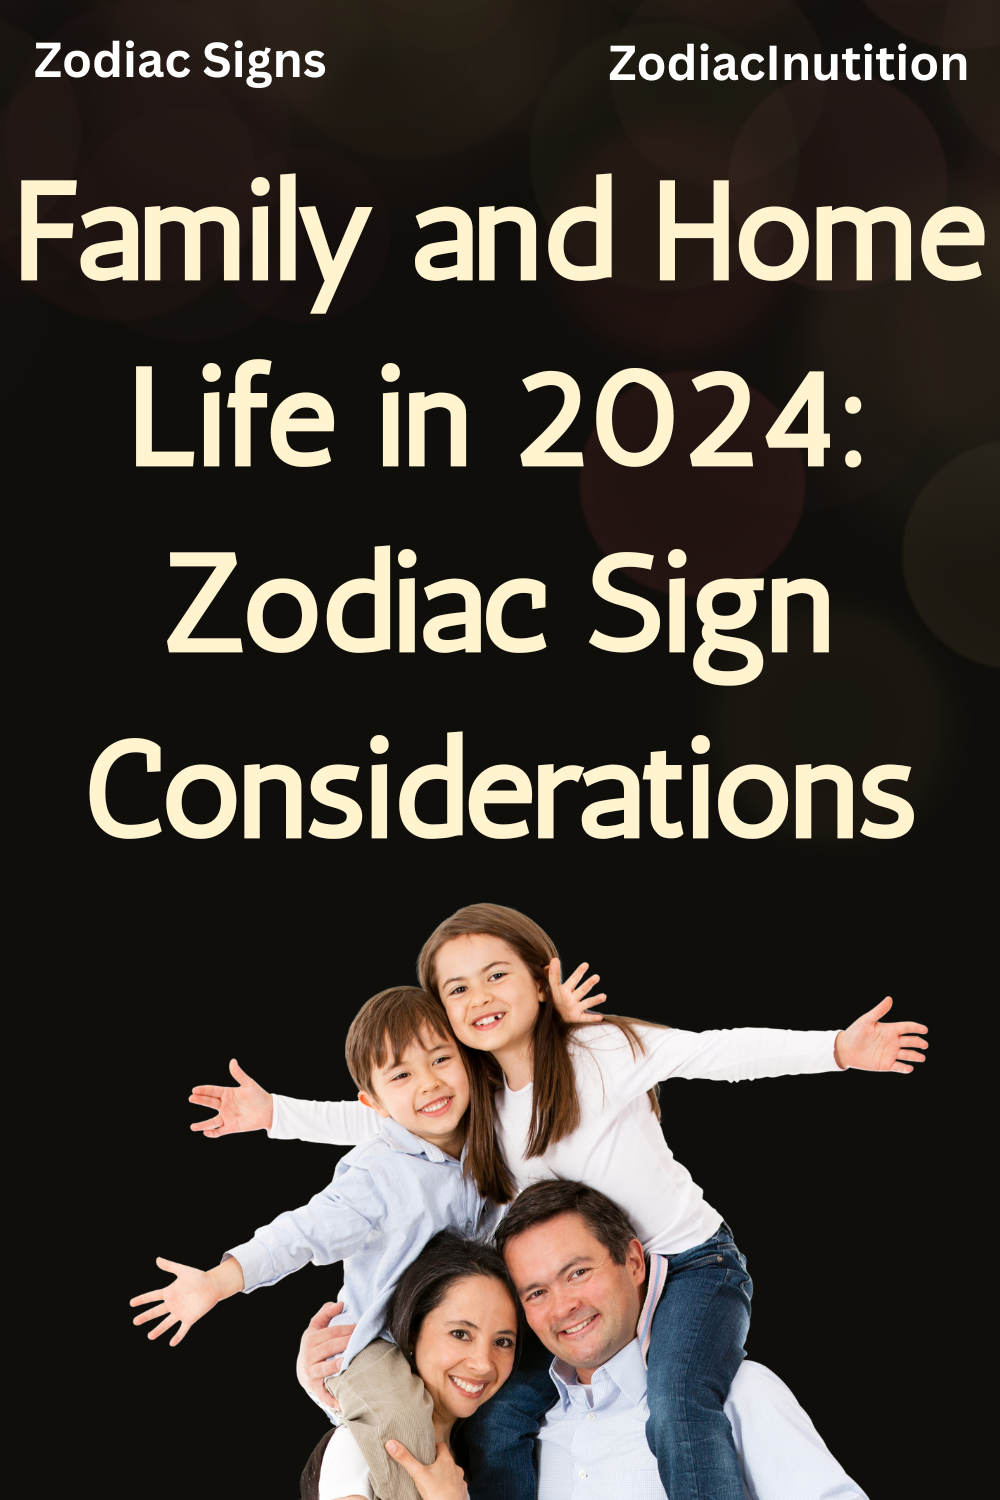 Family and Home Life in 2024: Zodiac Sign Considerations